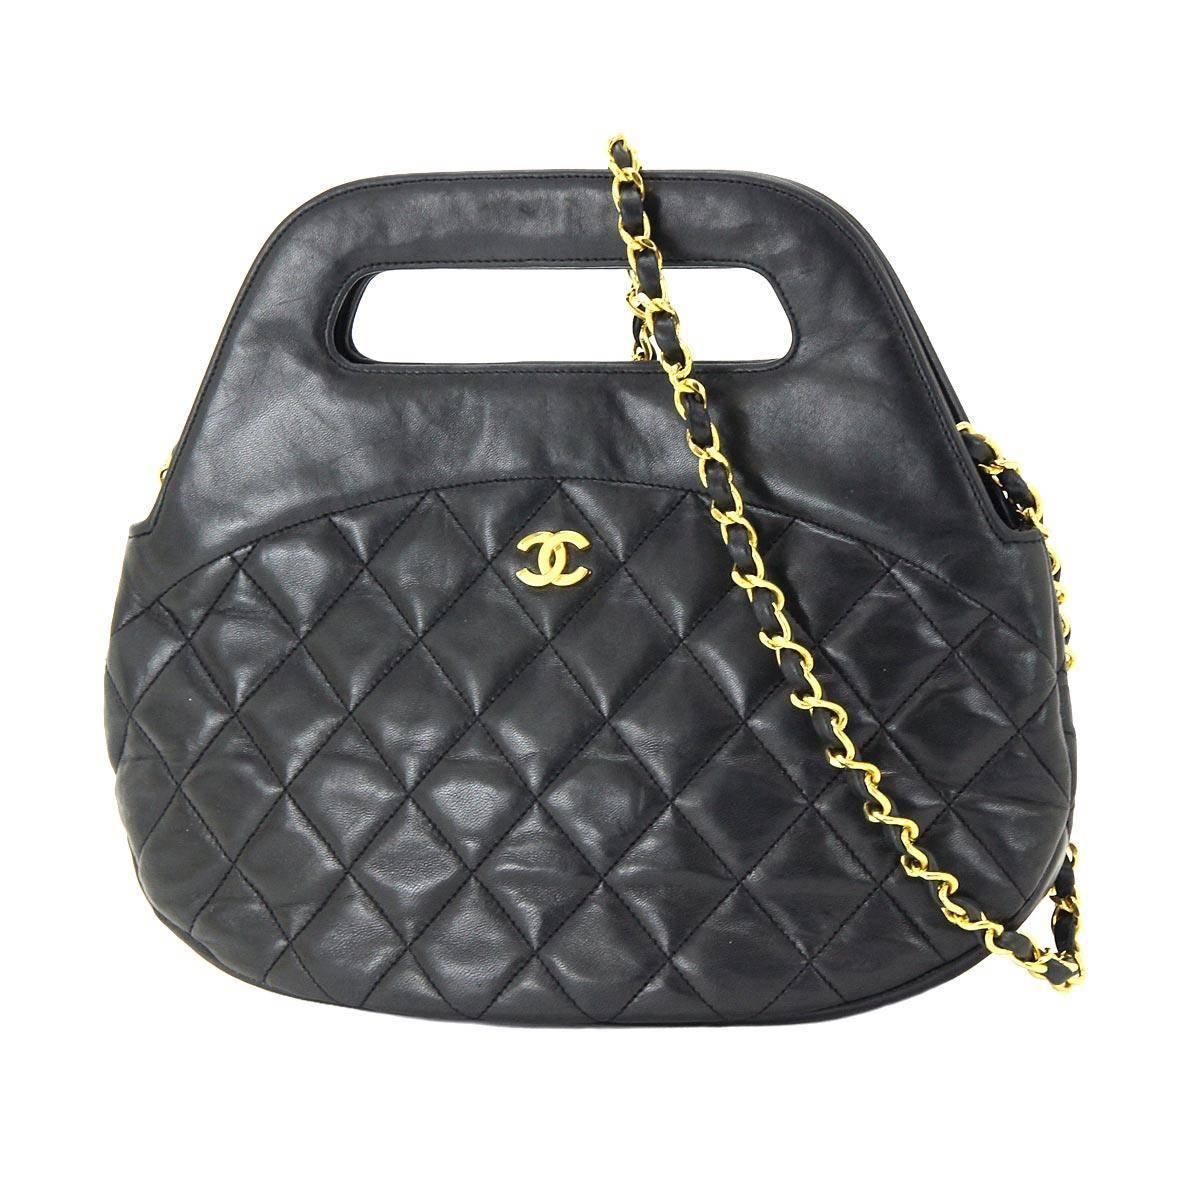 Chanel Black Lambskin Quilted Gold Chain Top Handle Satchel Crossbody Bag For Sale at 1stdibs